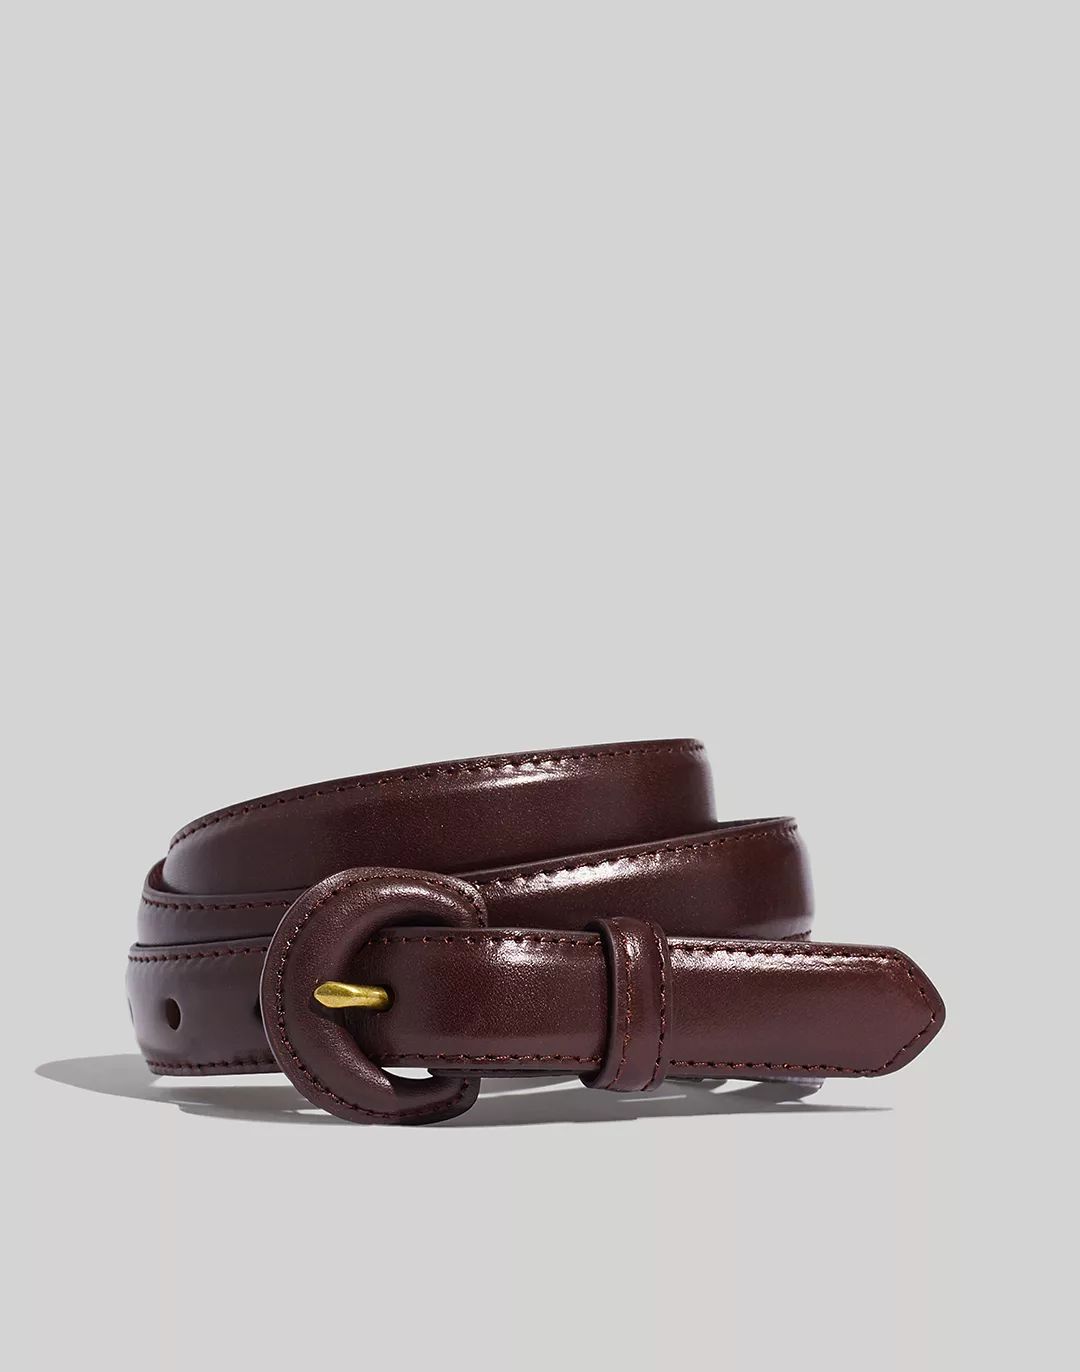 Leather Covered Buckle Belt | Madewell